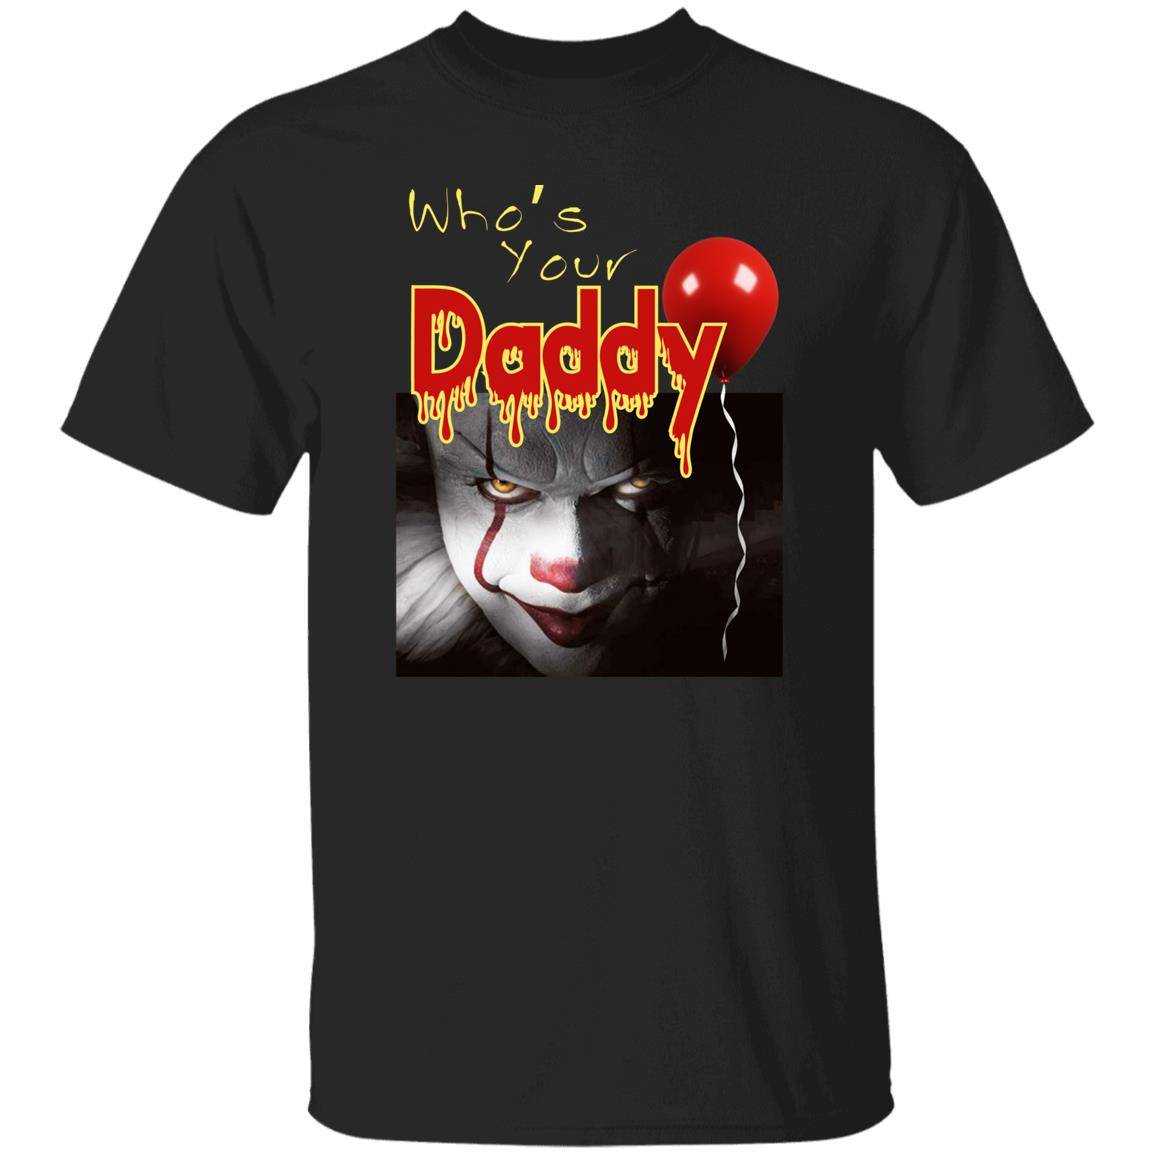 Black unisex Halloween short sleeve t-shirt with an image of a clown's sinister face and red balloon. The caption reads: Who's Your Daddy written in yellow and red letters. The red letters of Daddy, are outlined in yellow and in a drippy style font to simulate blood. The clown's face is simulated to look like Pennywise the clown from the movie It.